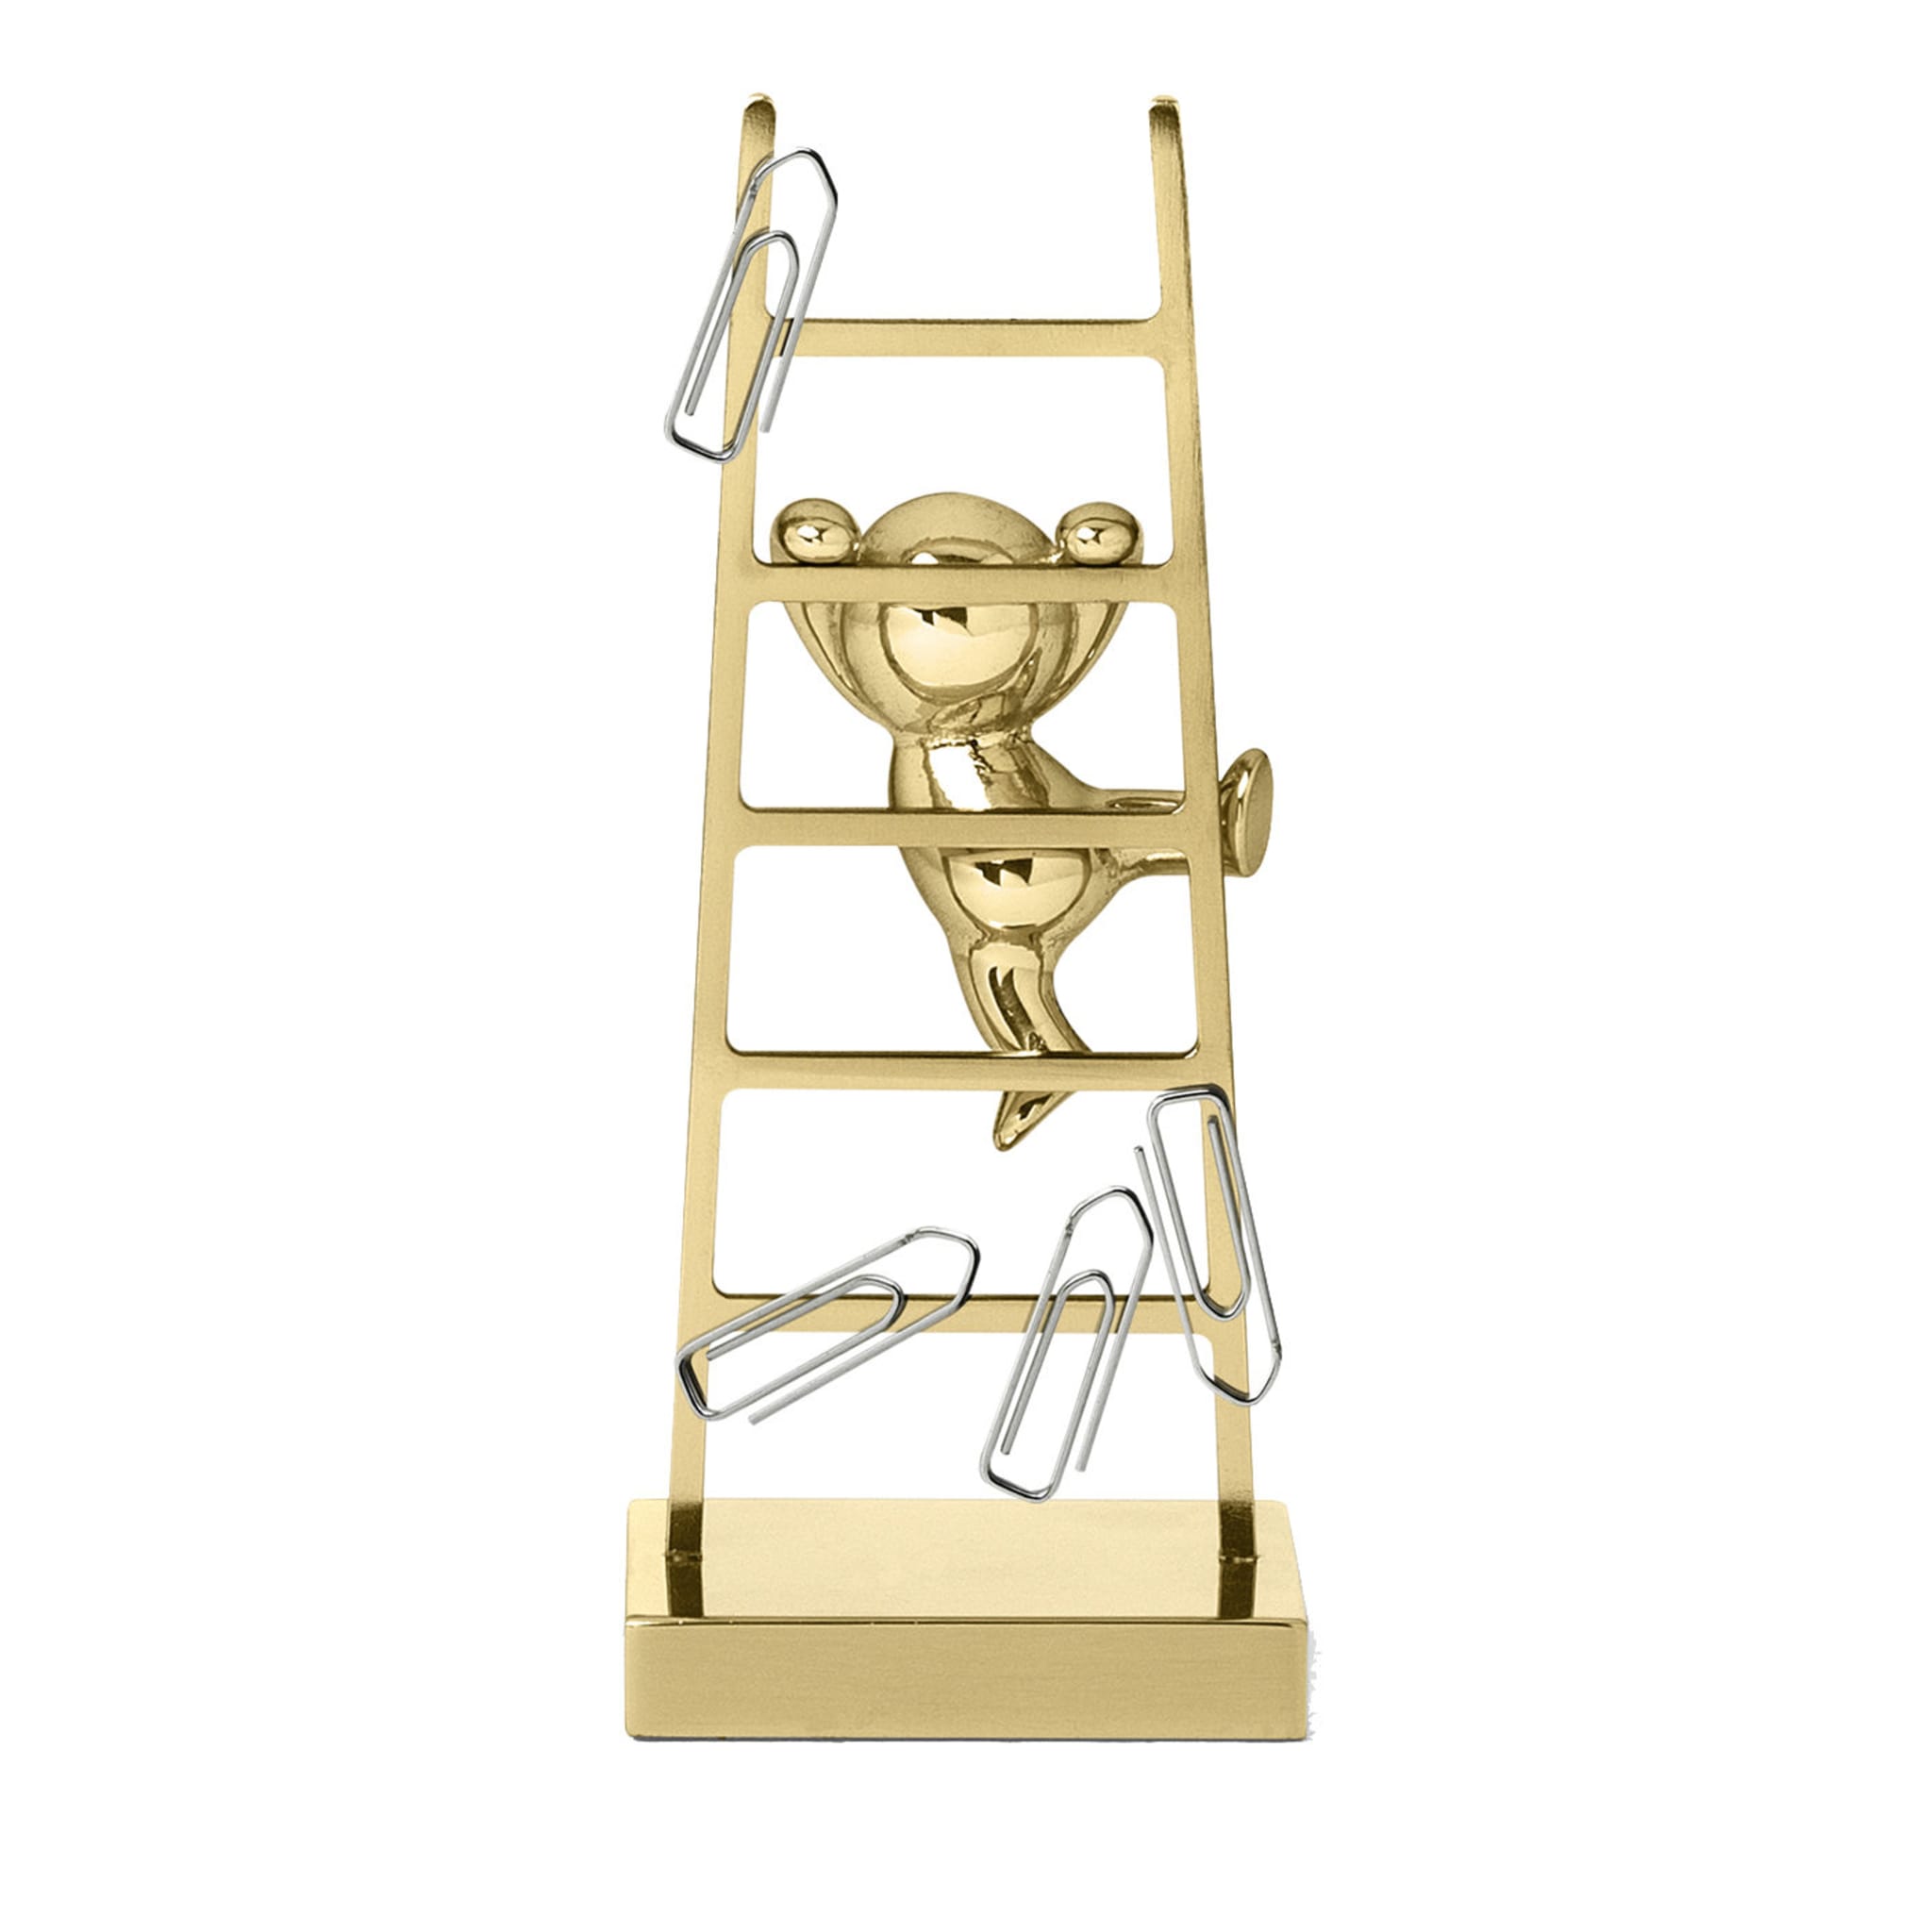 Omini Climber Clip Holder in Polished Brass By Stefano Giovannoni - Alternative view 1